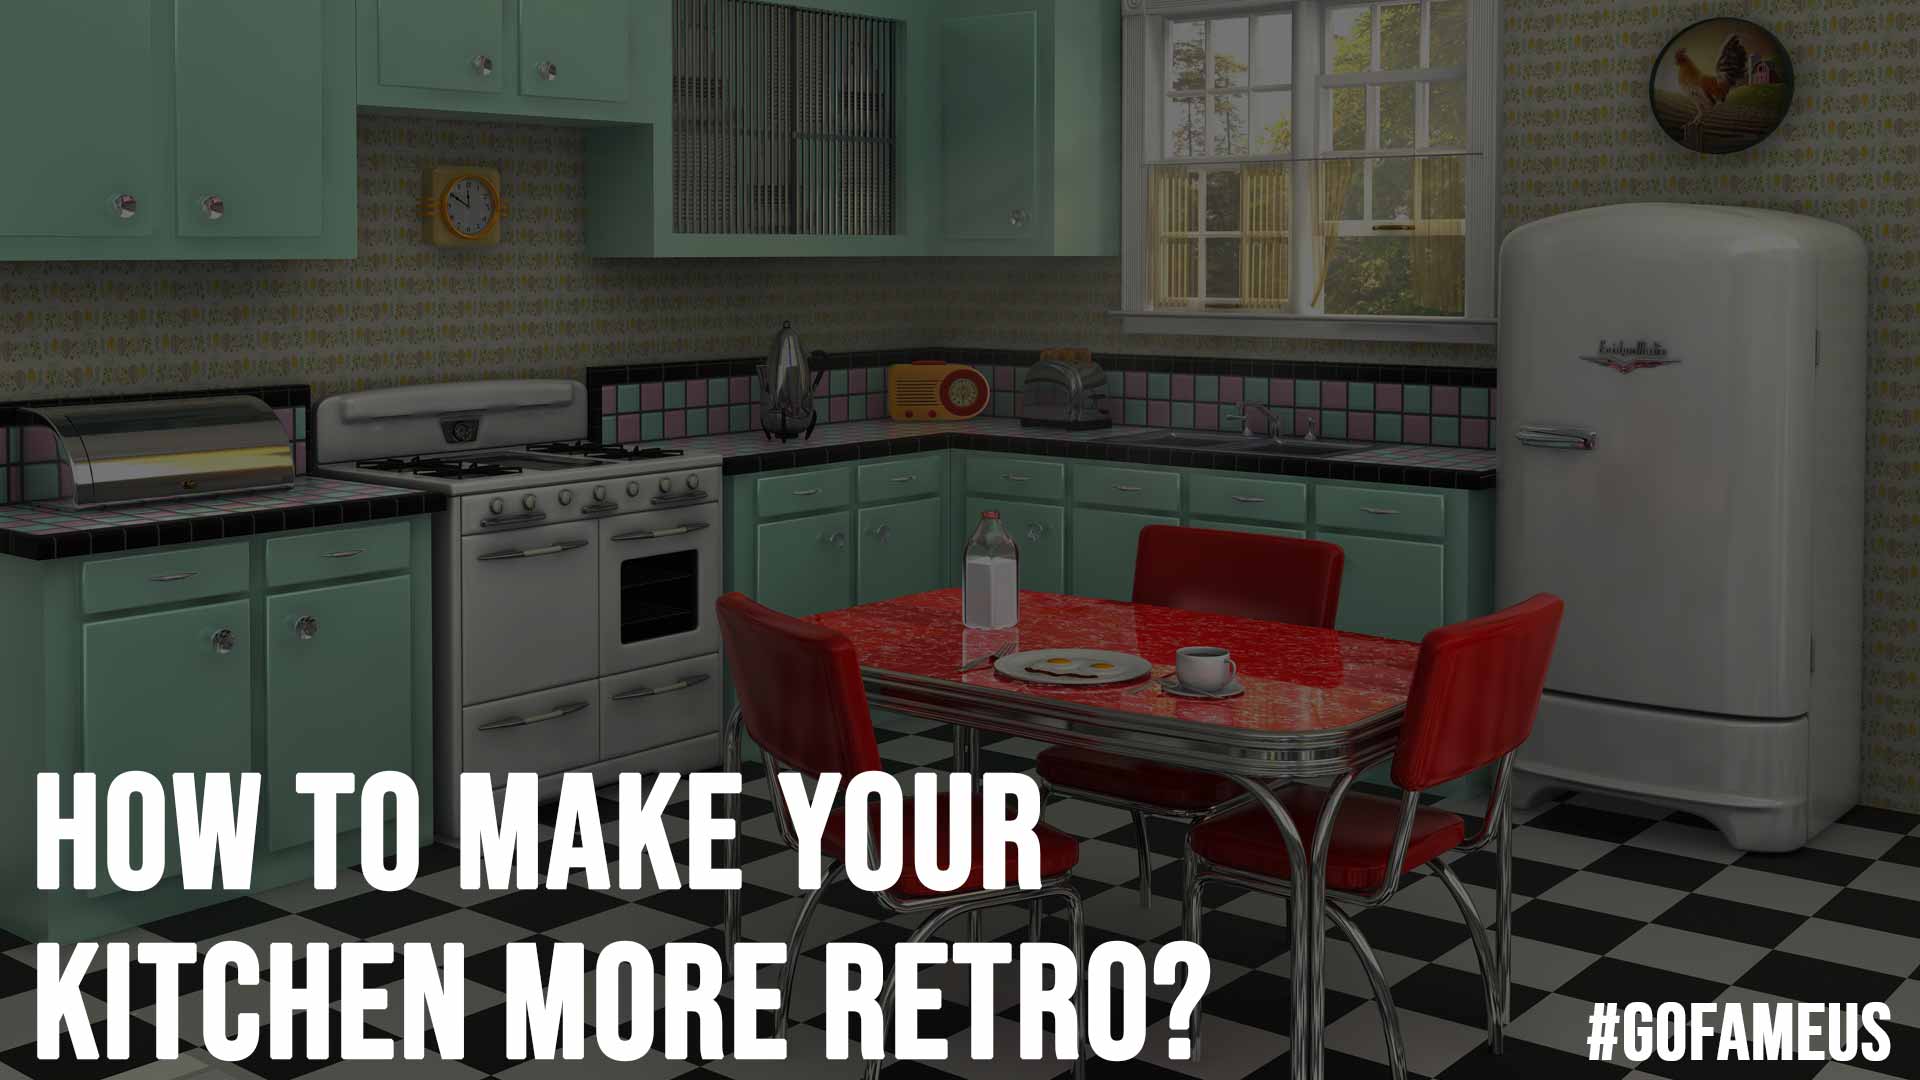 How to Make Your Kitchen More Retro